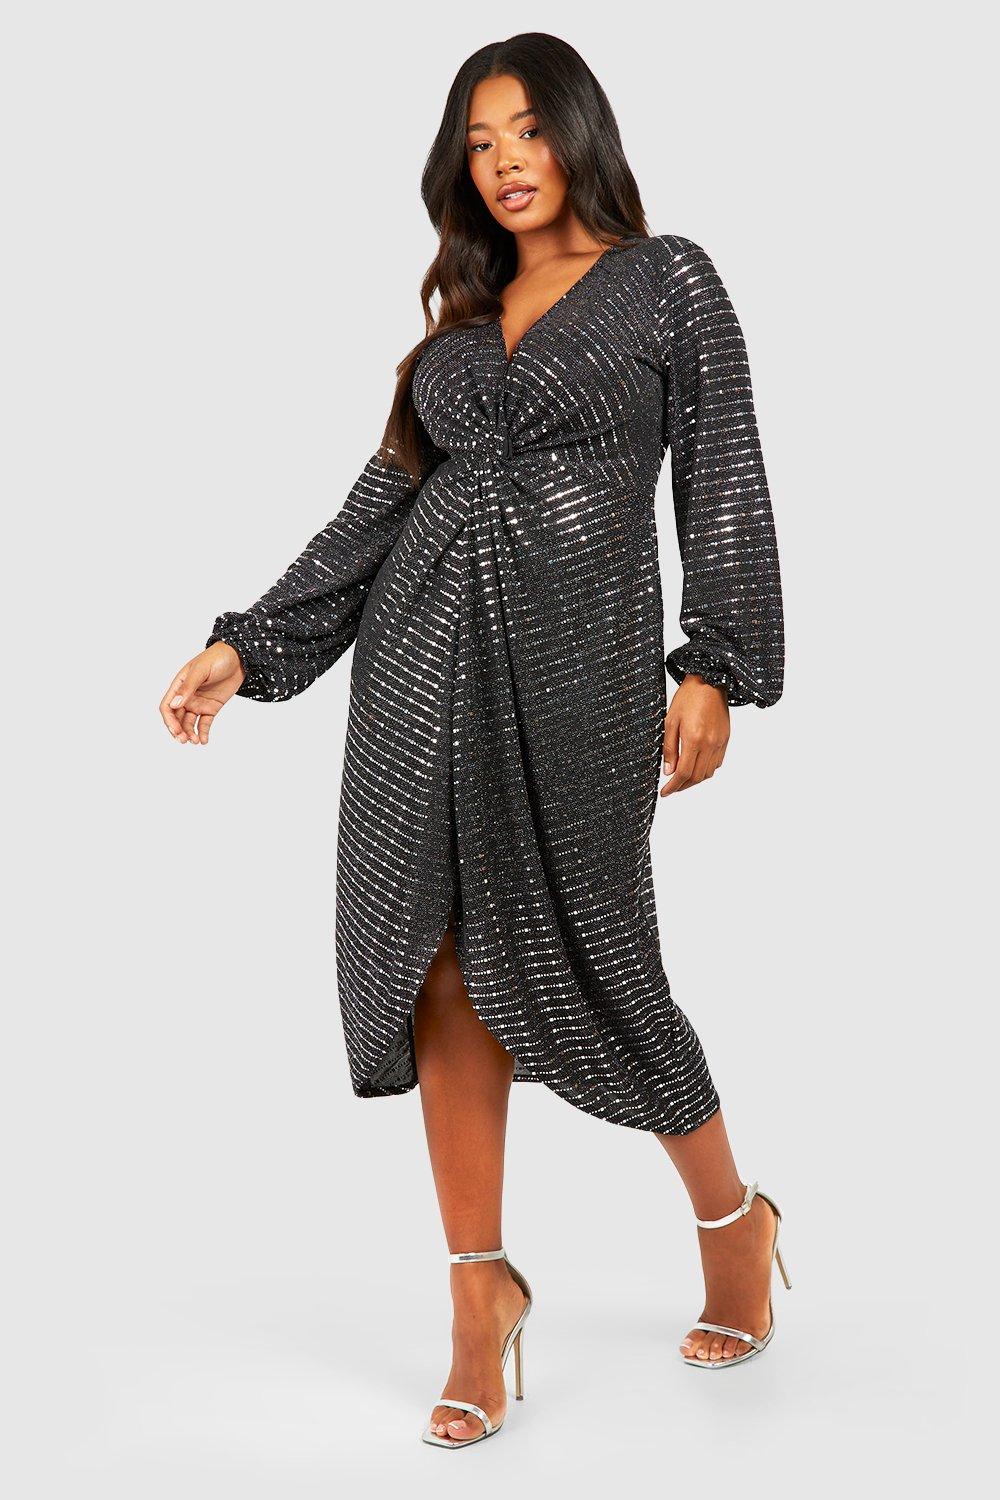 dress for christmas party plus size